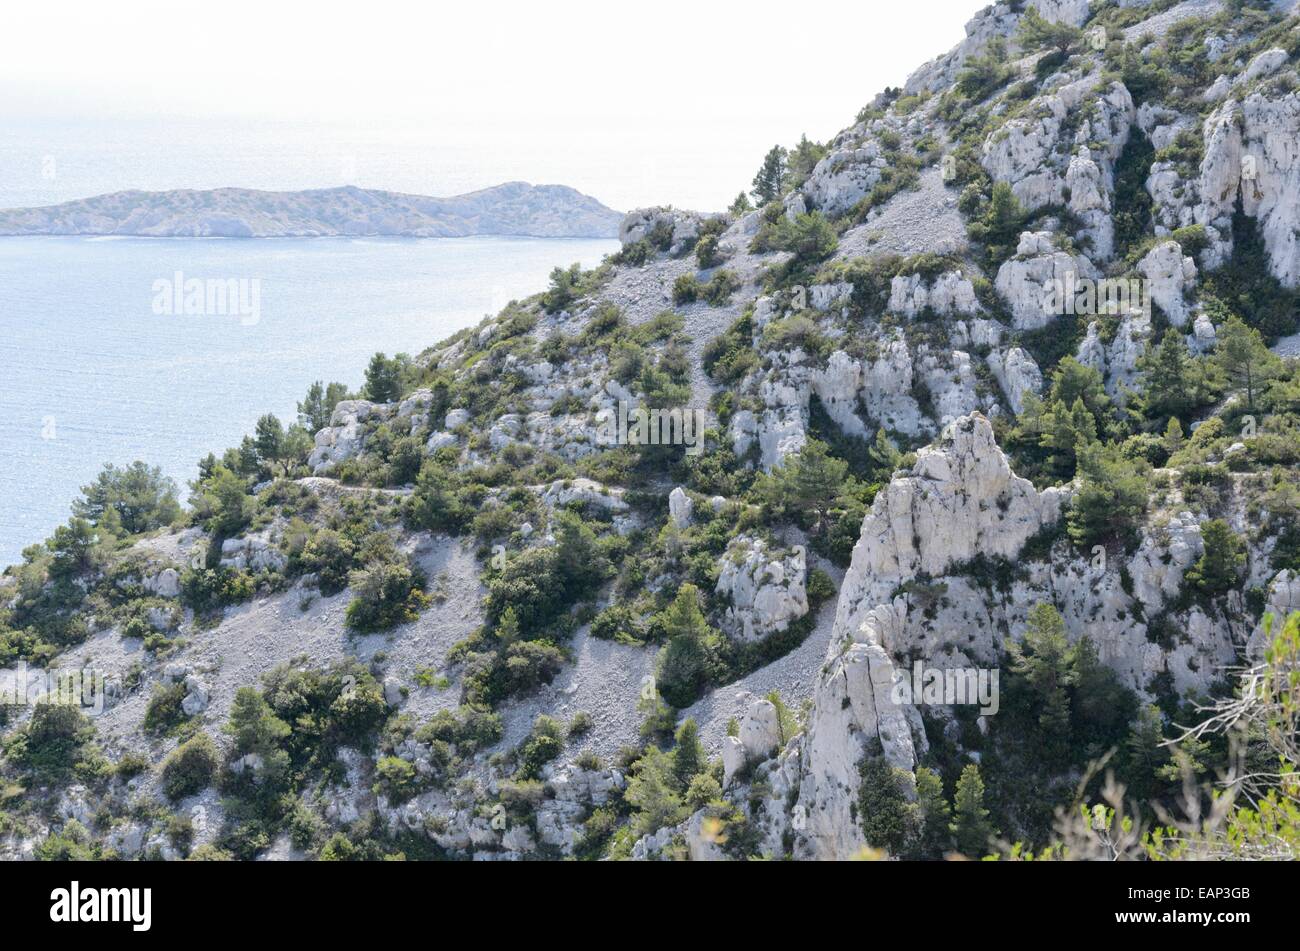 Aleppo pines (Pinus halepensis), Calanques National Park, France Stock Photo